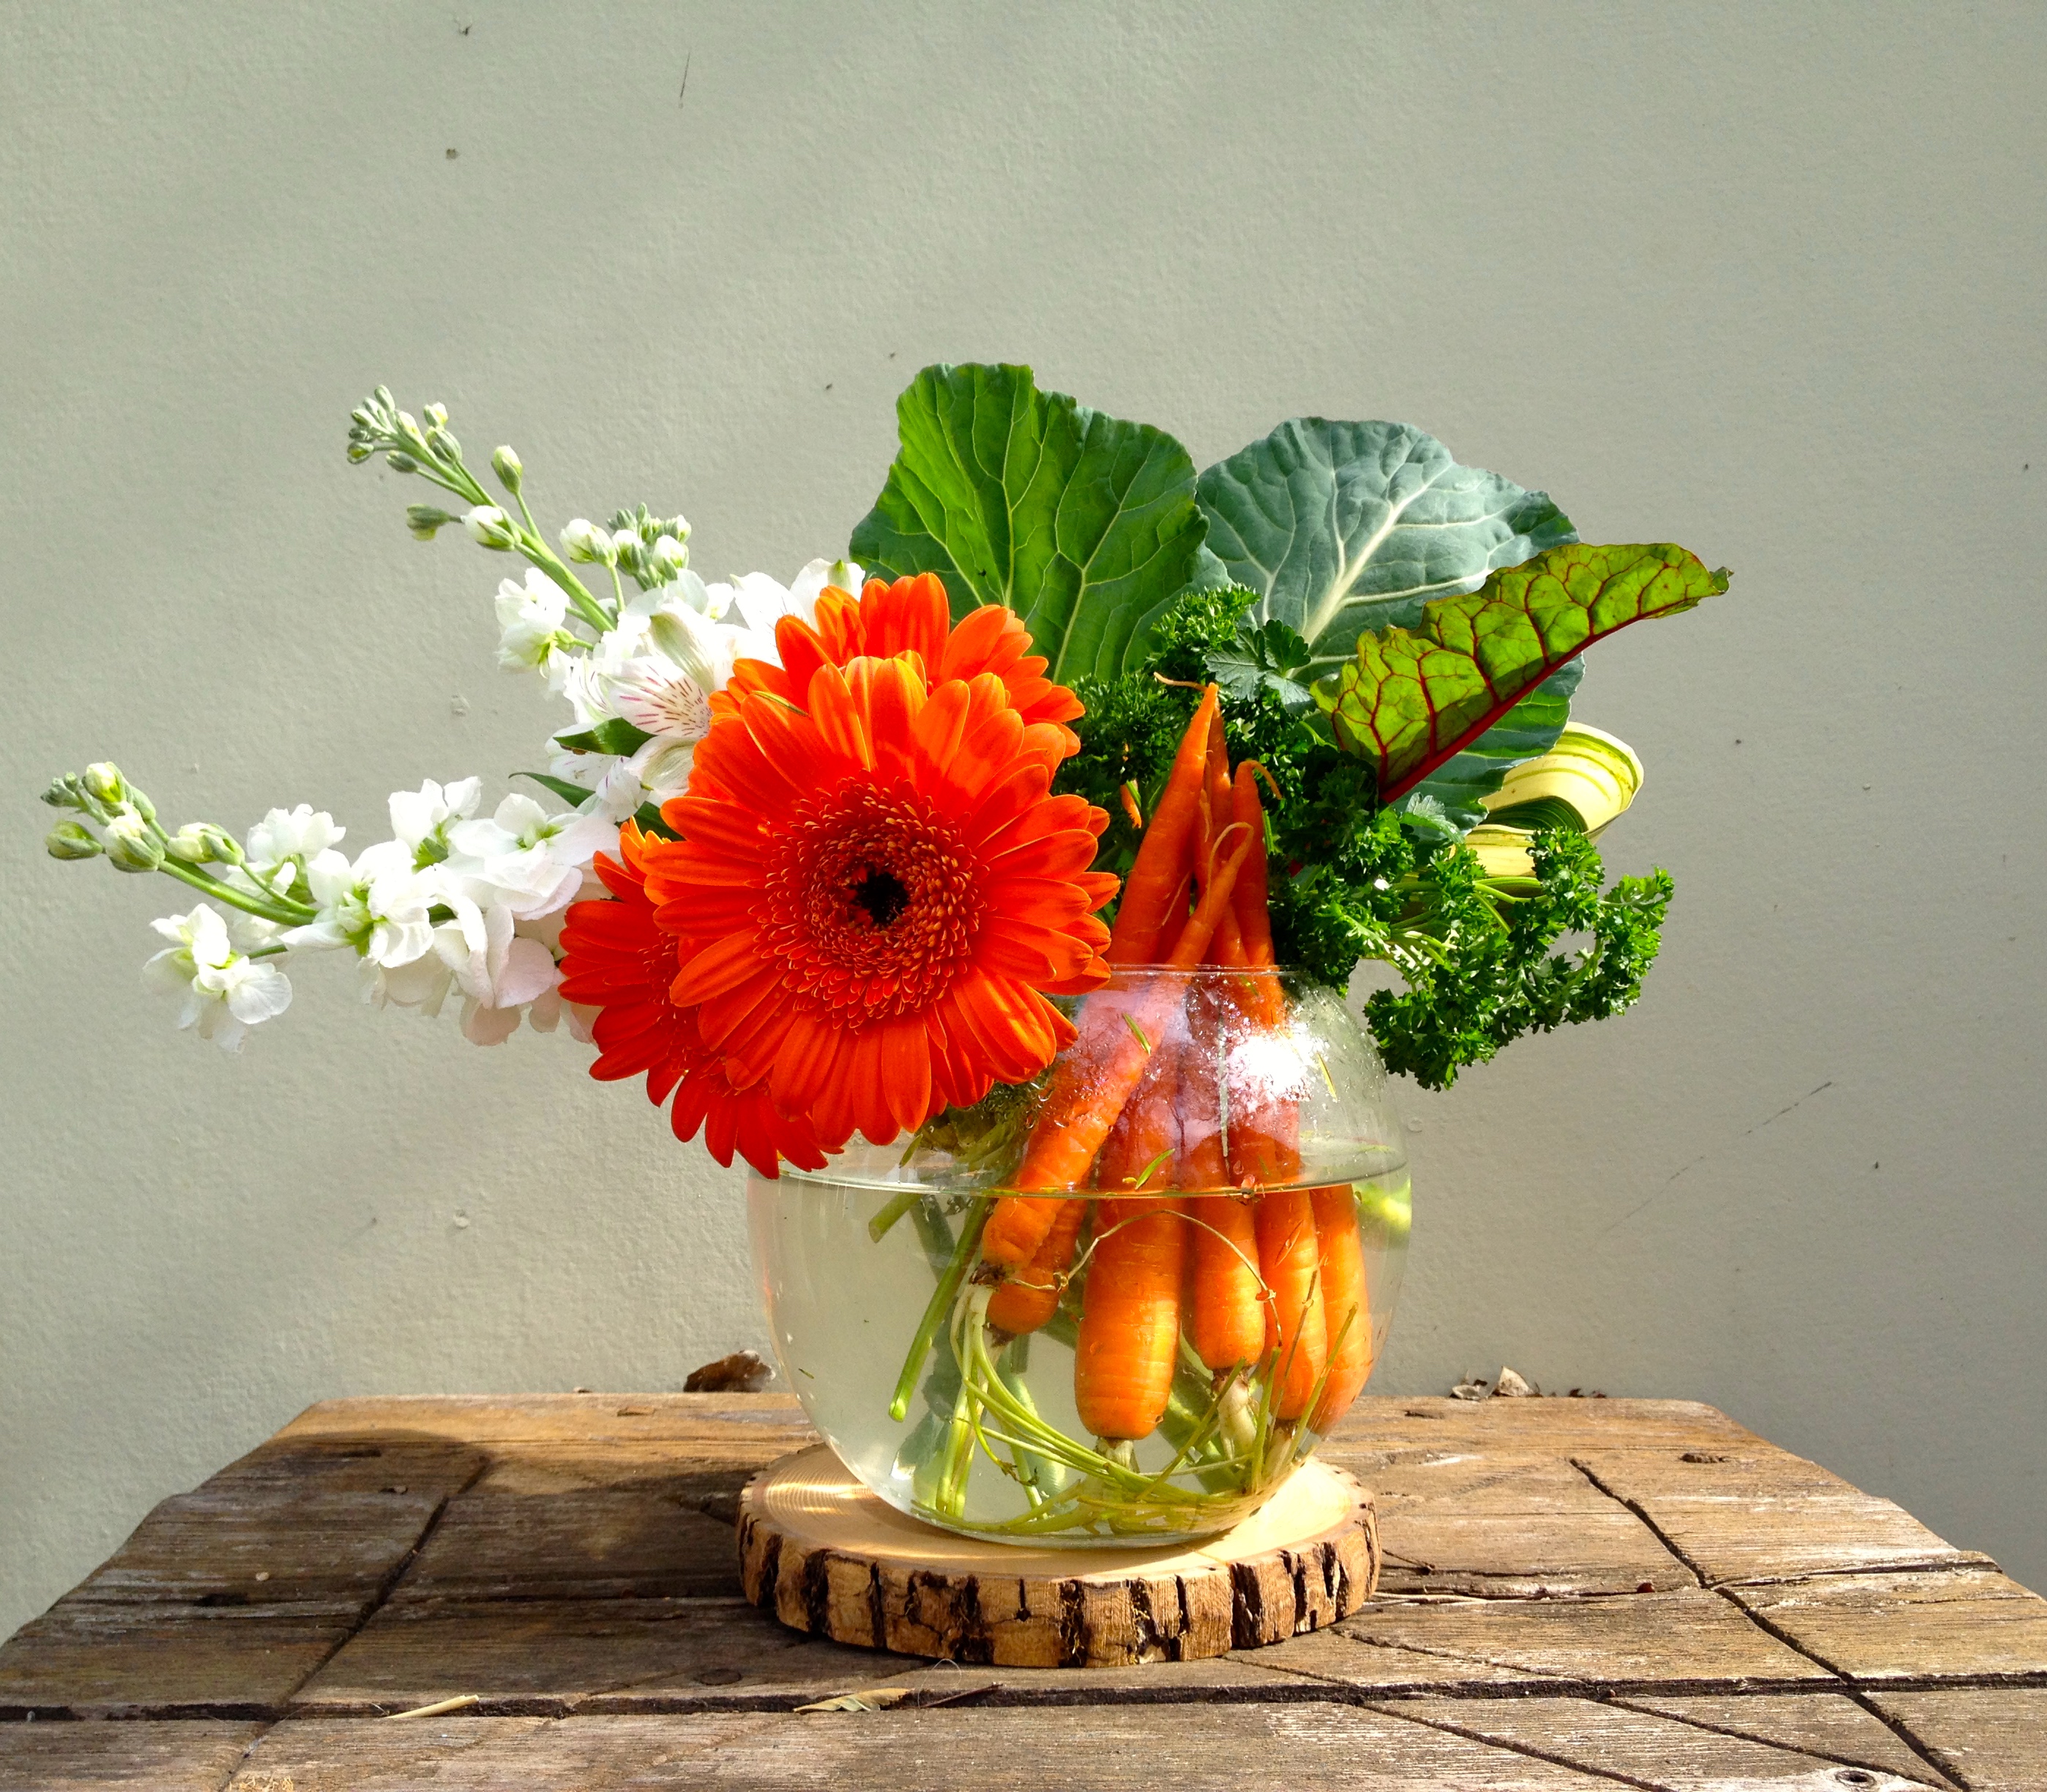 How to use Carrots in your flower arrangements | Flowers for the People